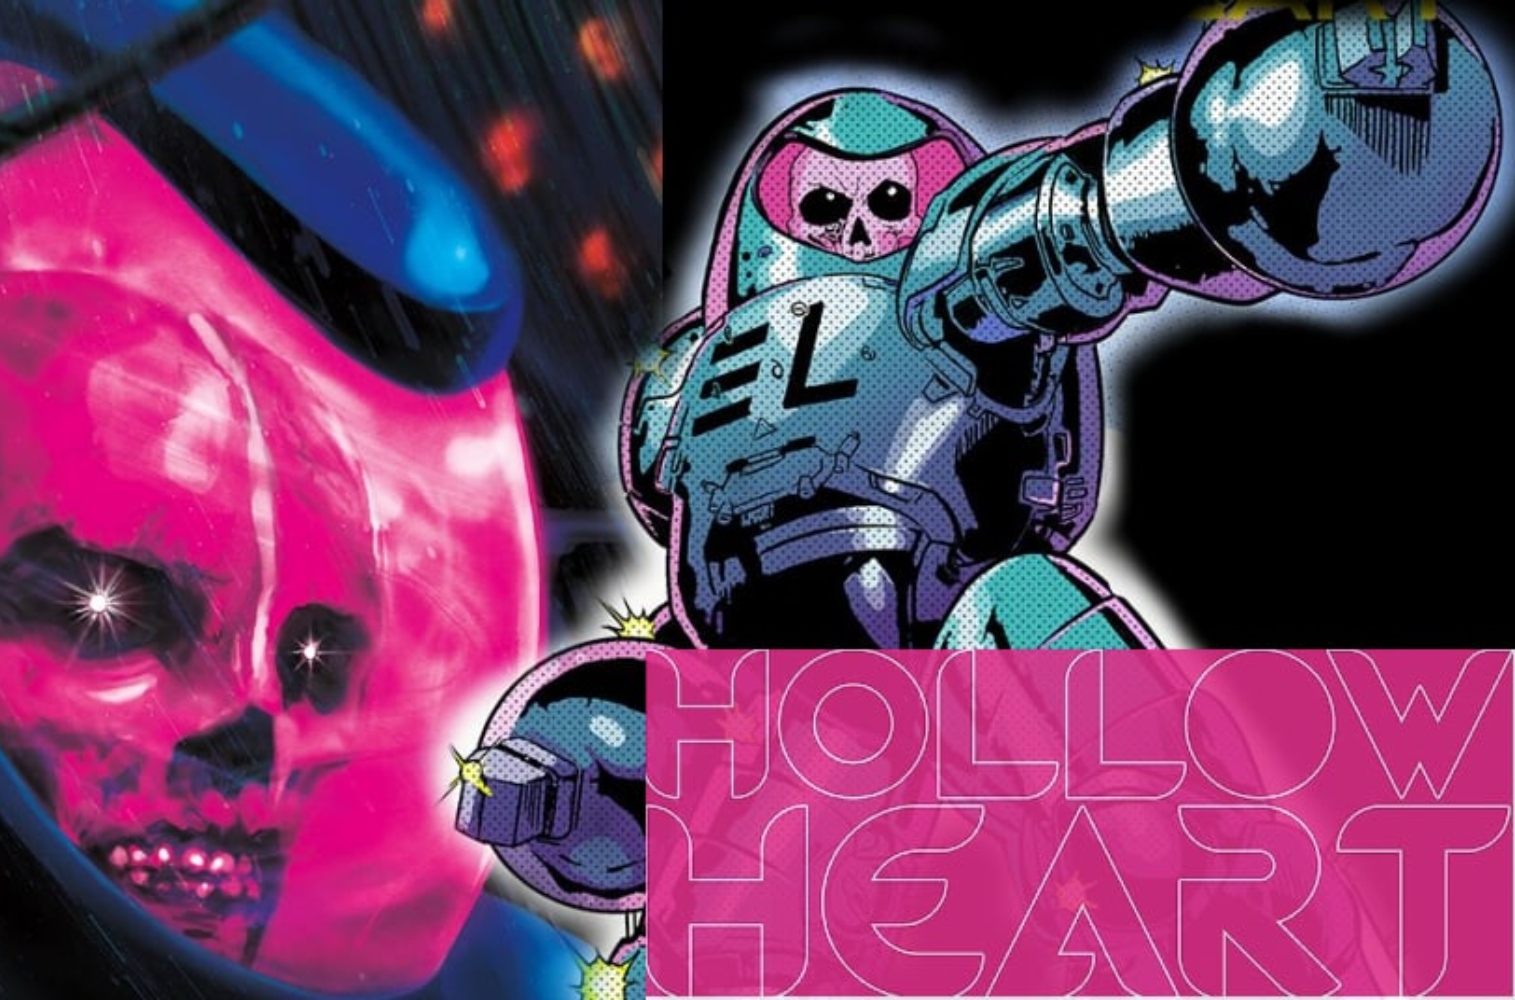 'Hollow Heart' #1 review: talking 'bout love, horror, and bio-suit sludge monsters